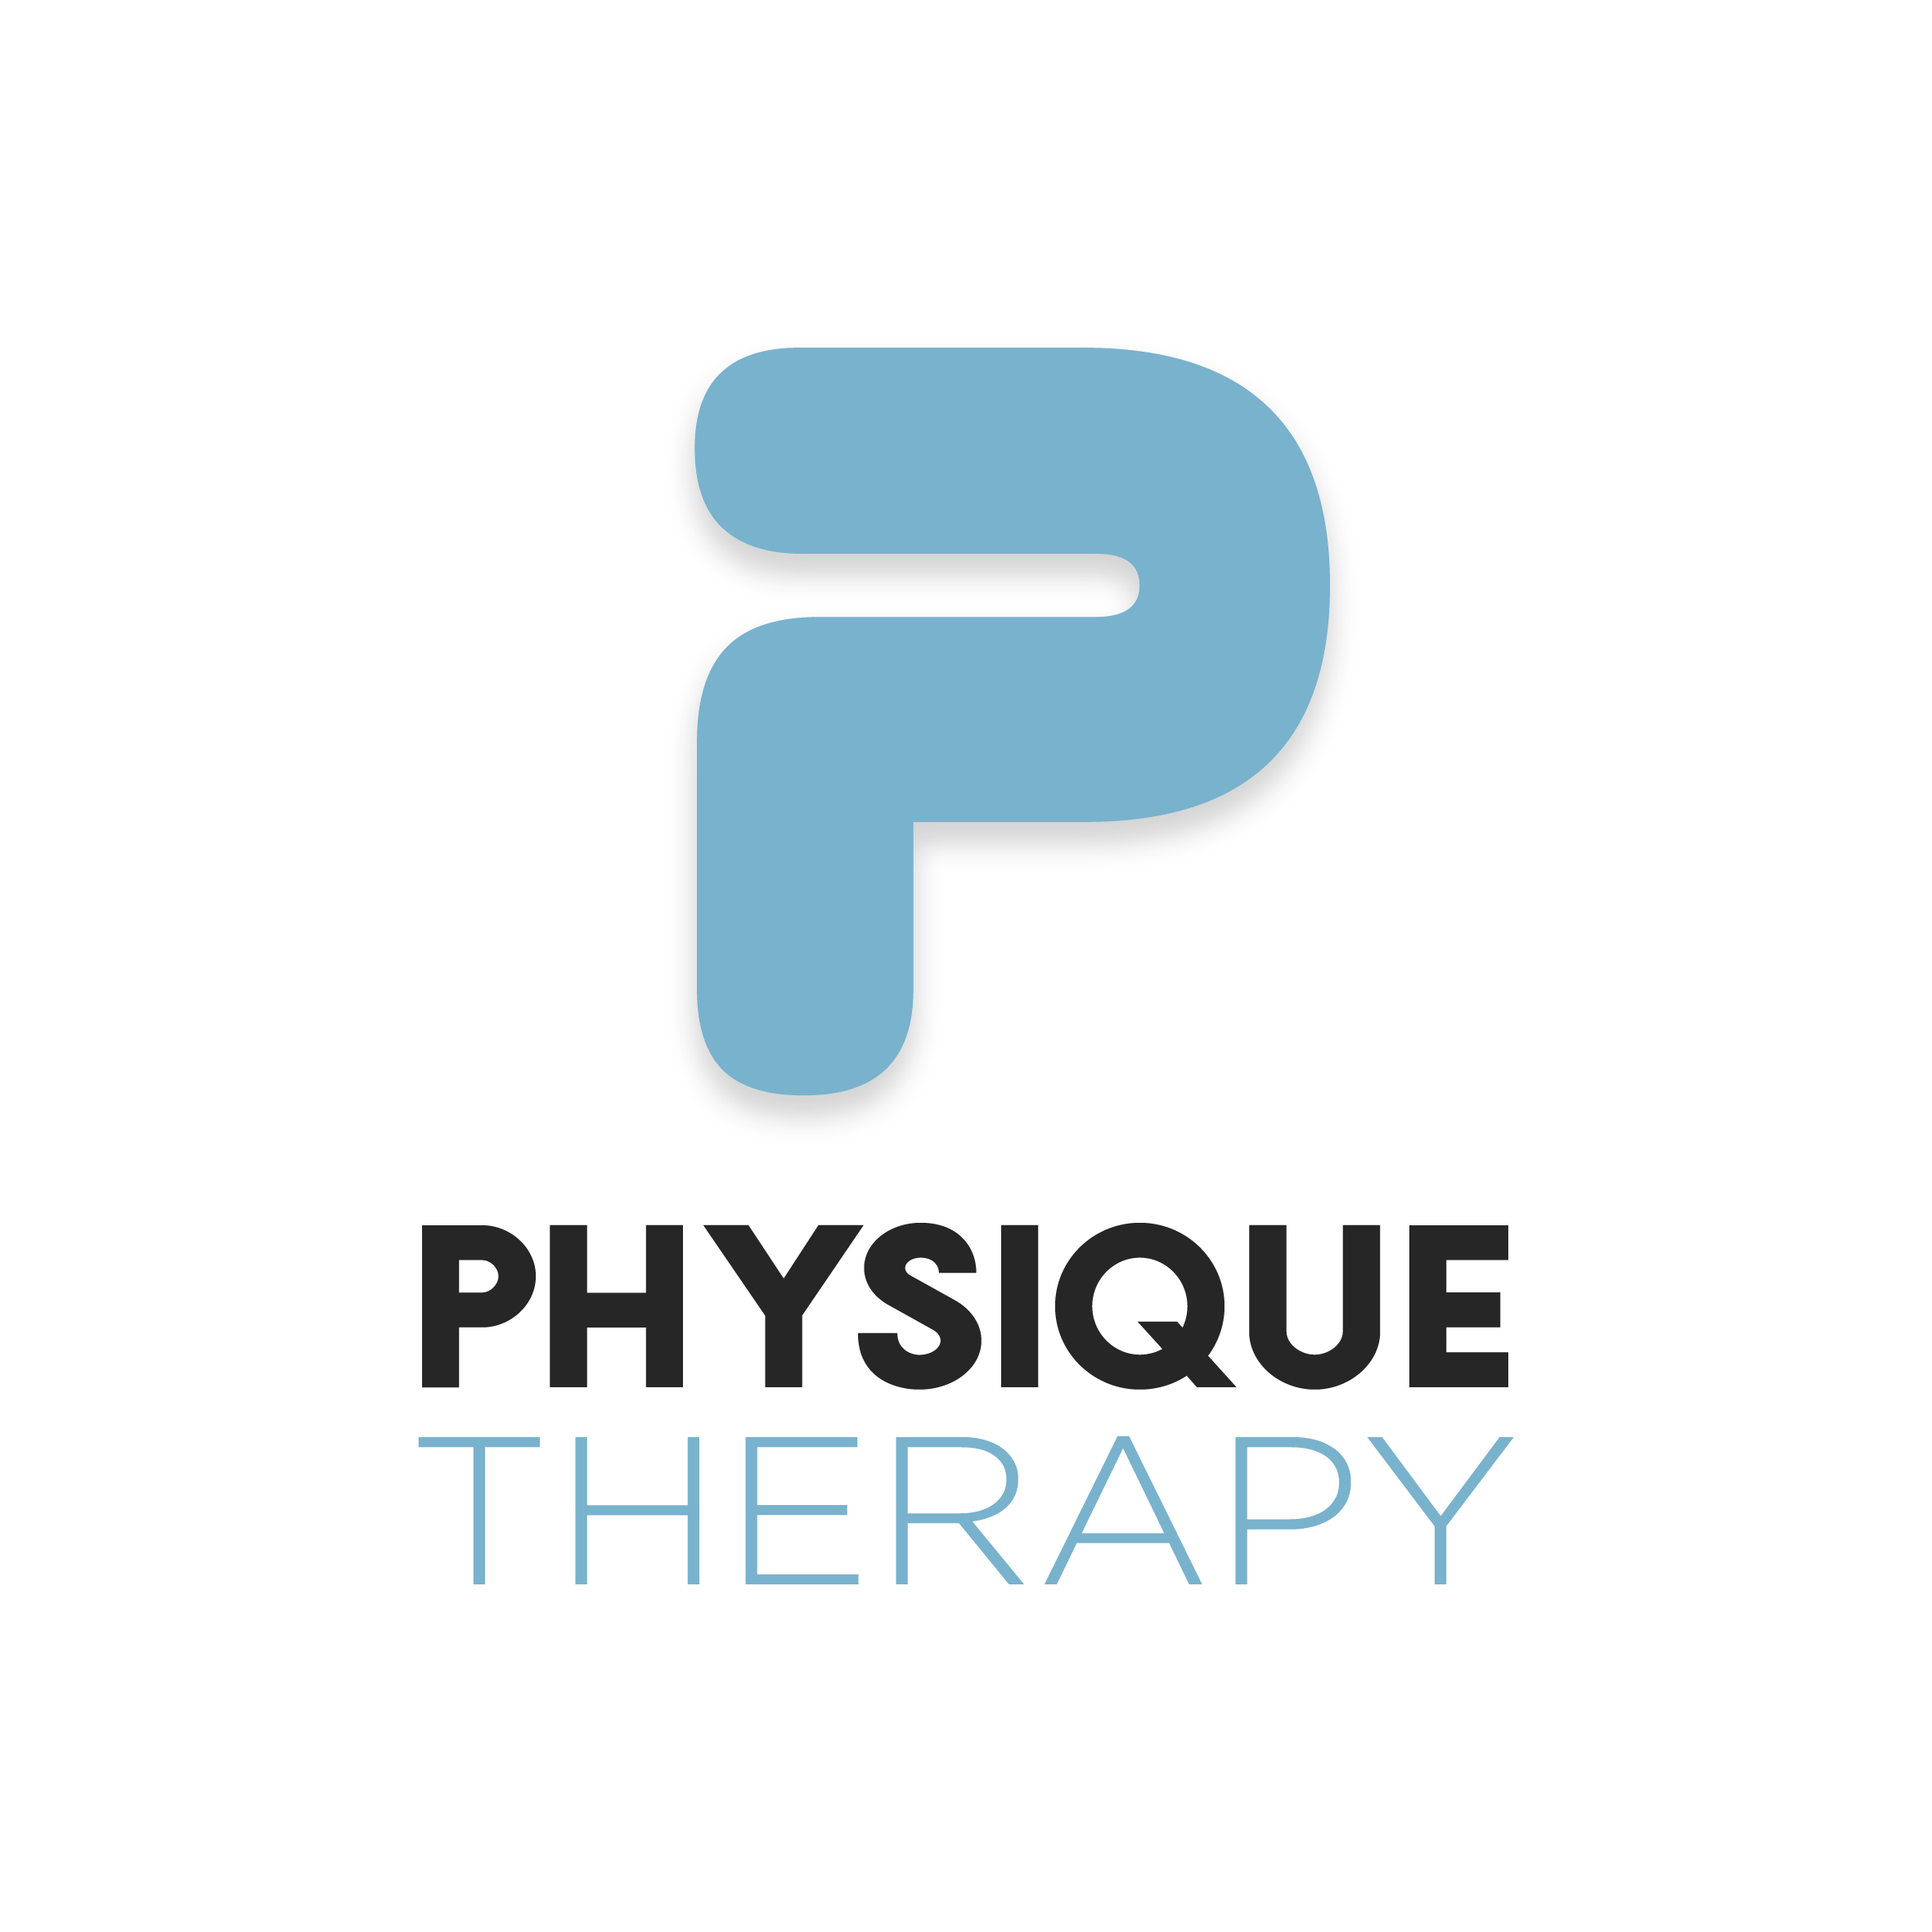 Physique Therapy LOGO